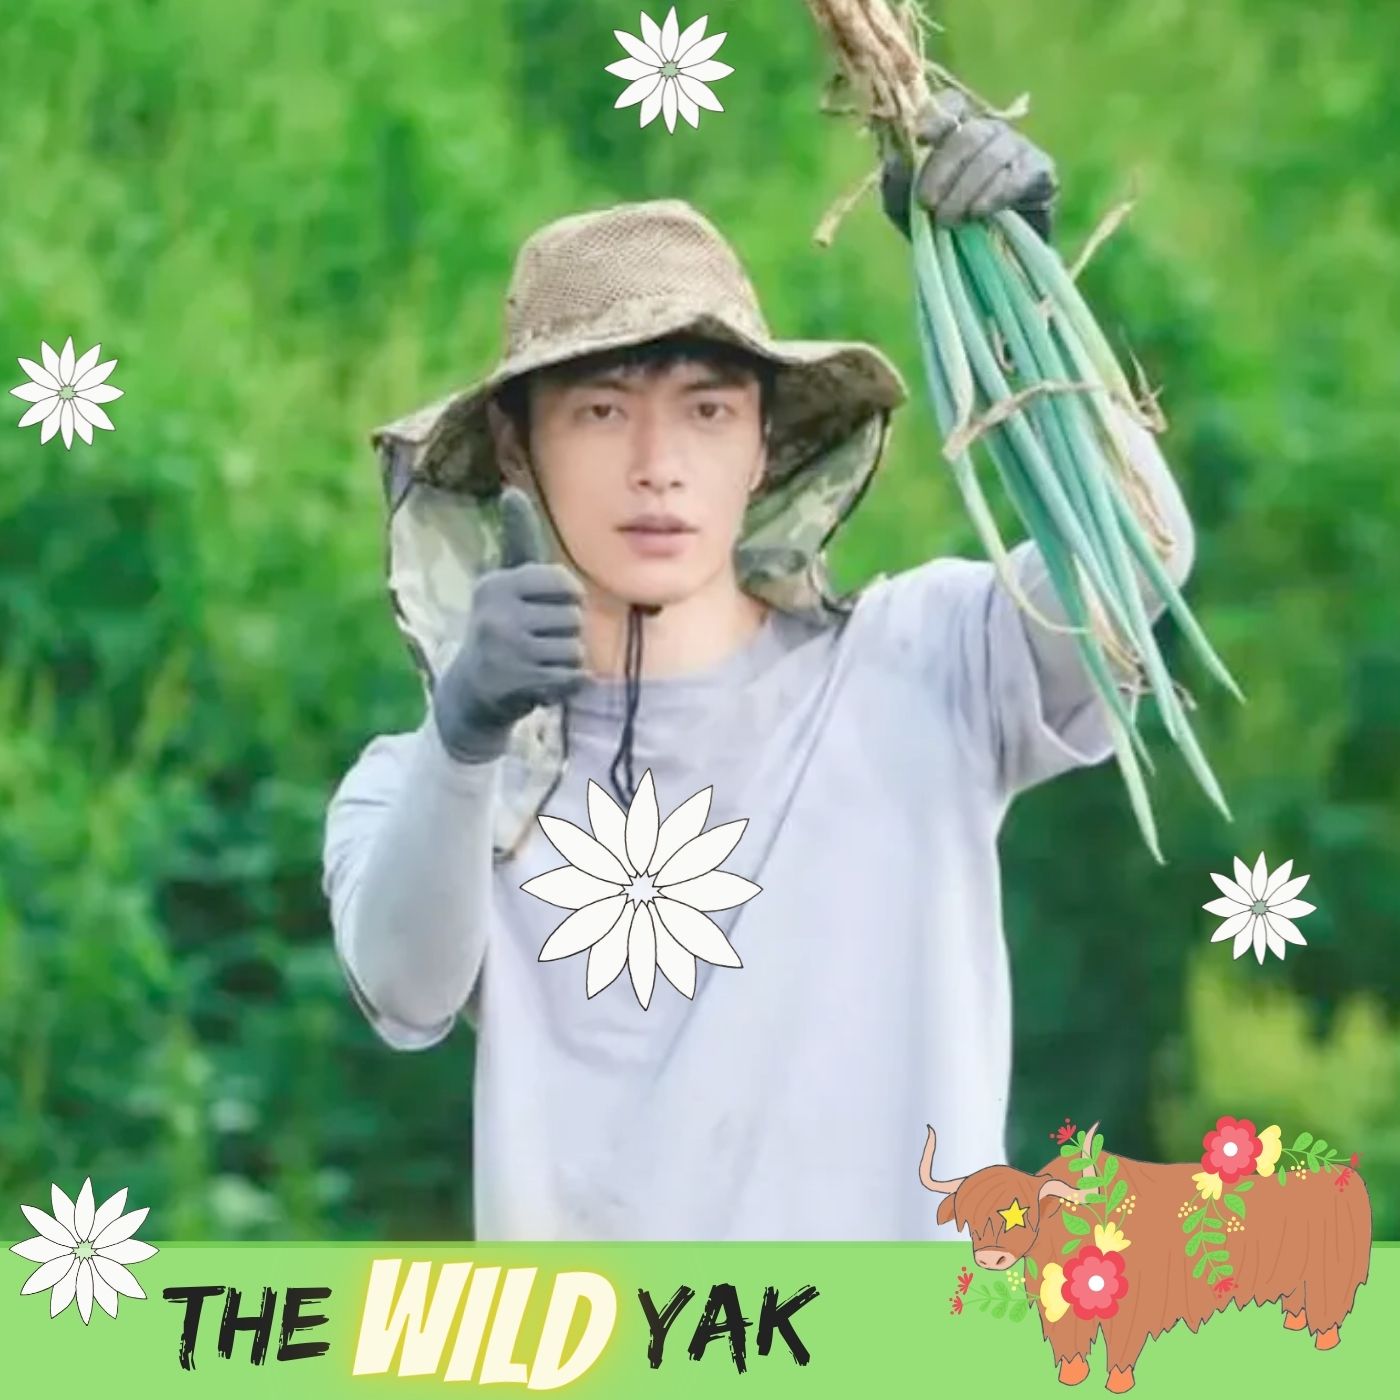 Lee Min-ki and Everything We've Watched Him In [A Wild Yak]